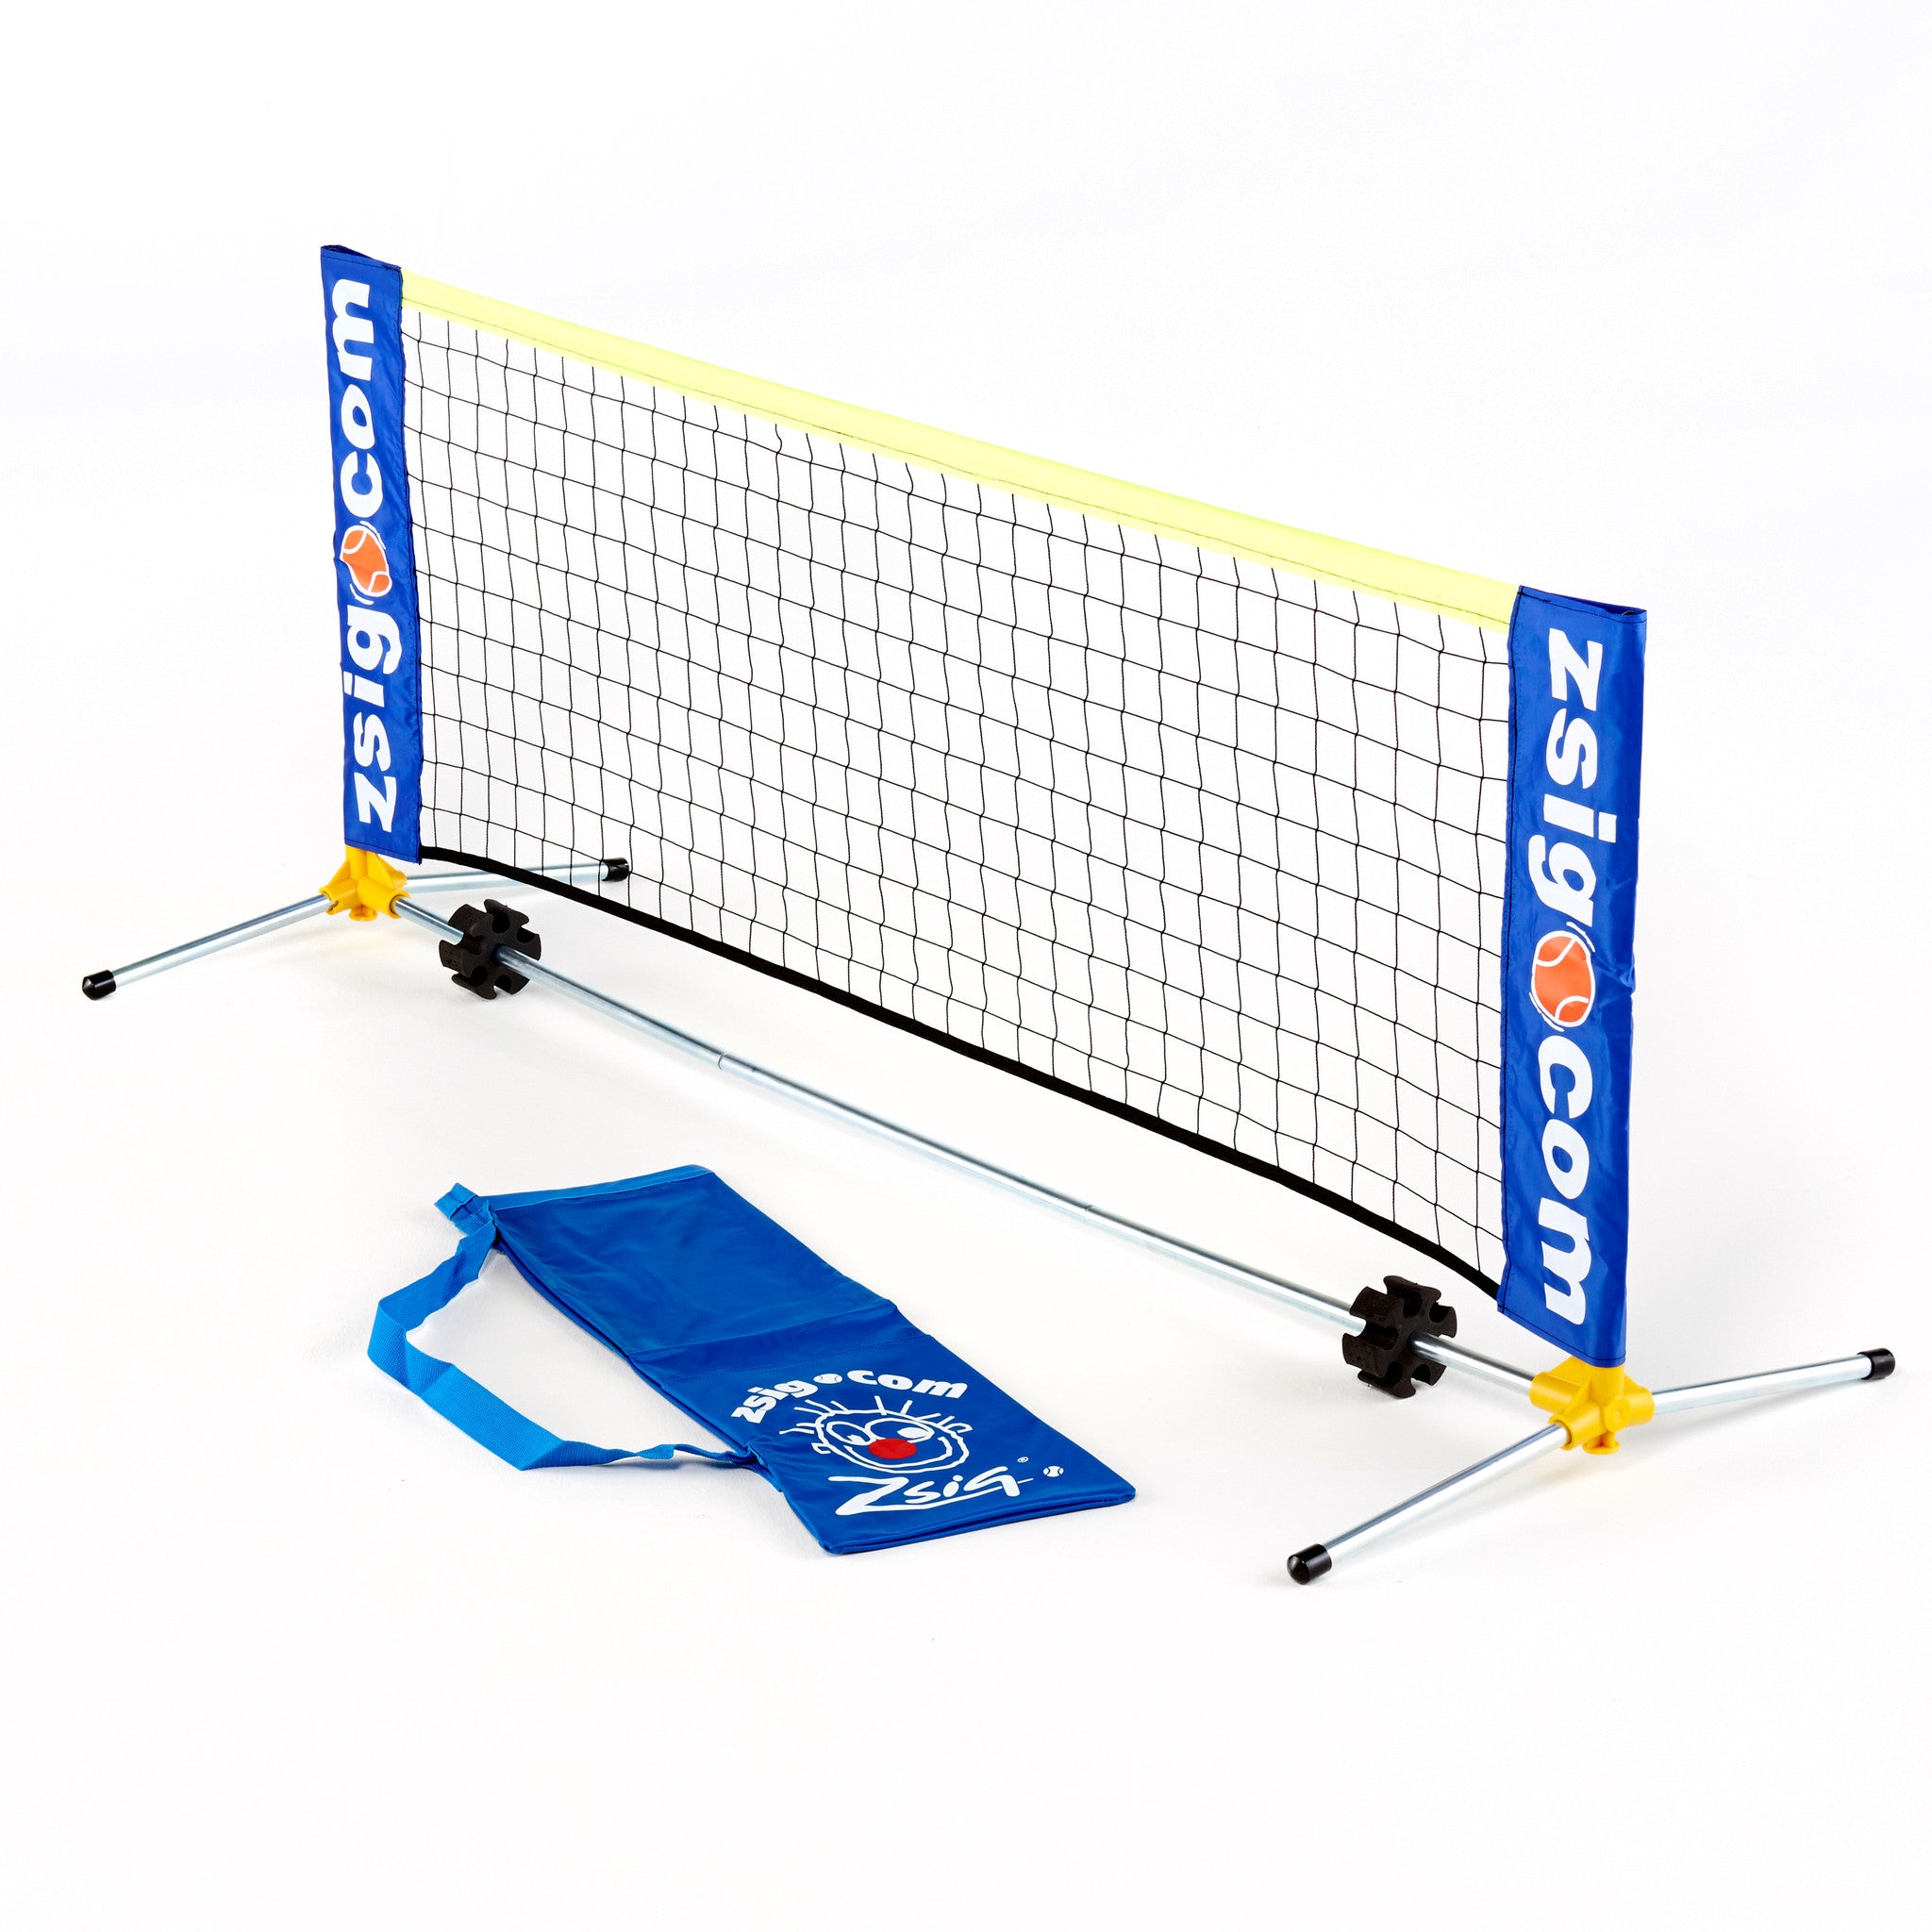 Mini Tennis Net for Early Years from Zsig. 1.8m. Carry holdall. Patented shoulder joint in yellow. Easy to set up, easily portable & Made in Britain high quality design.